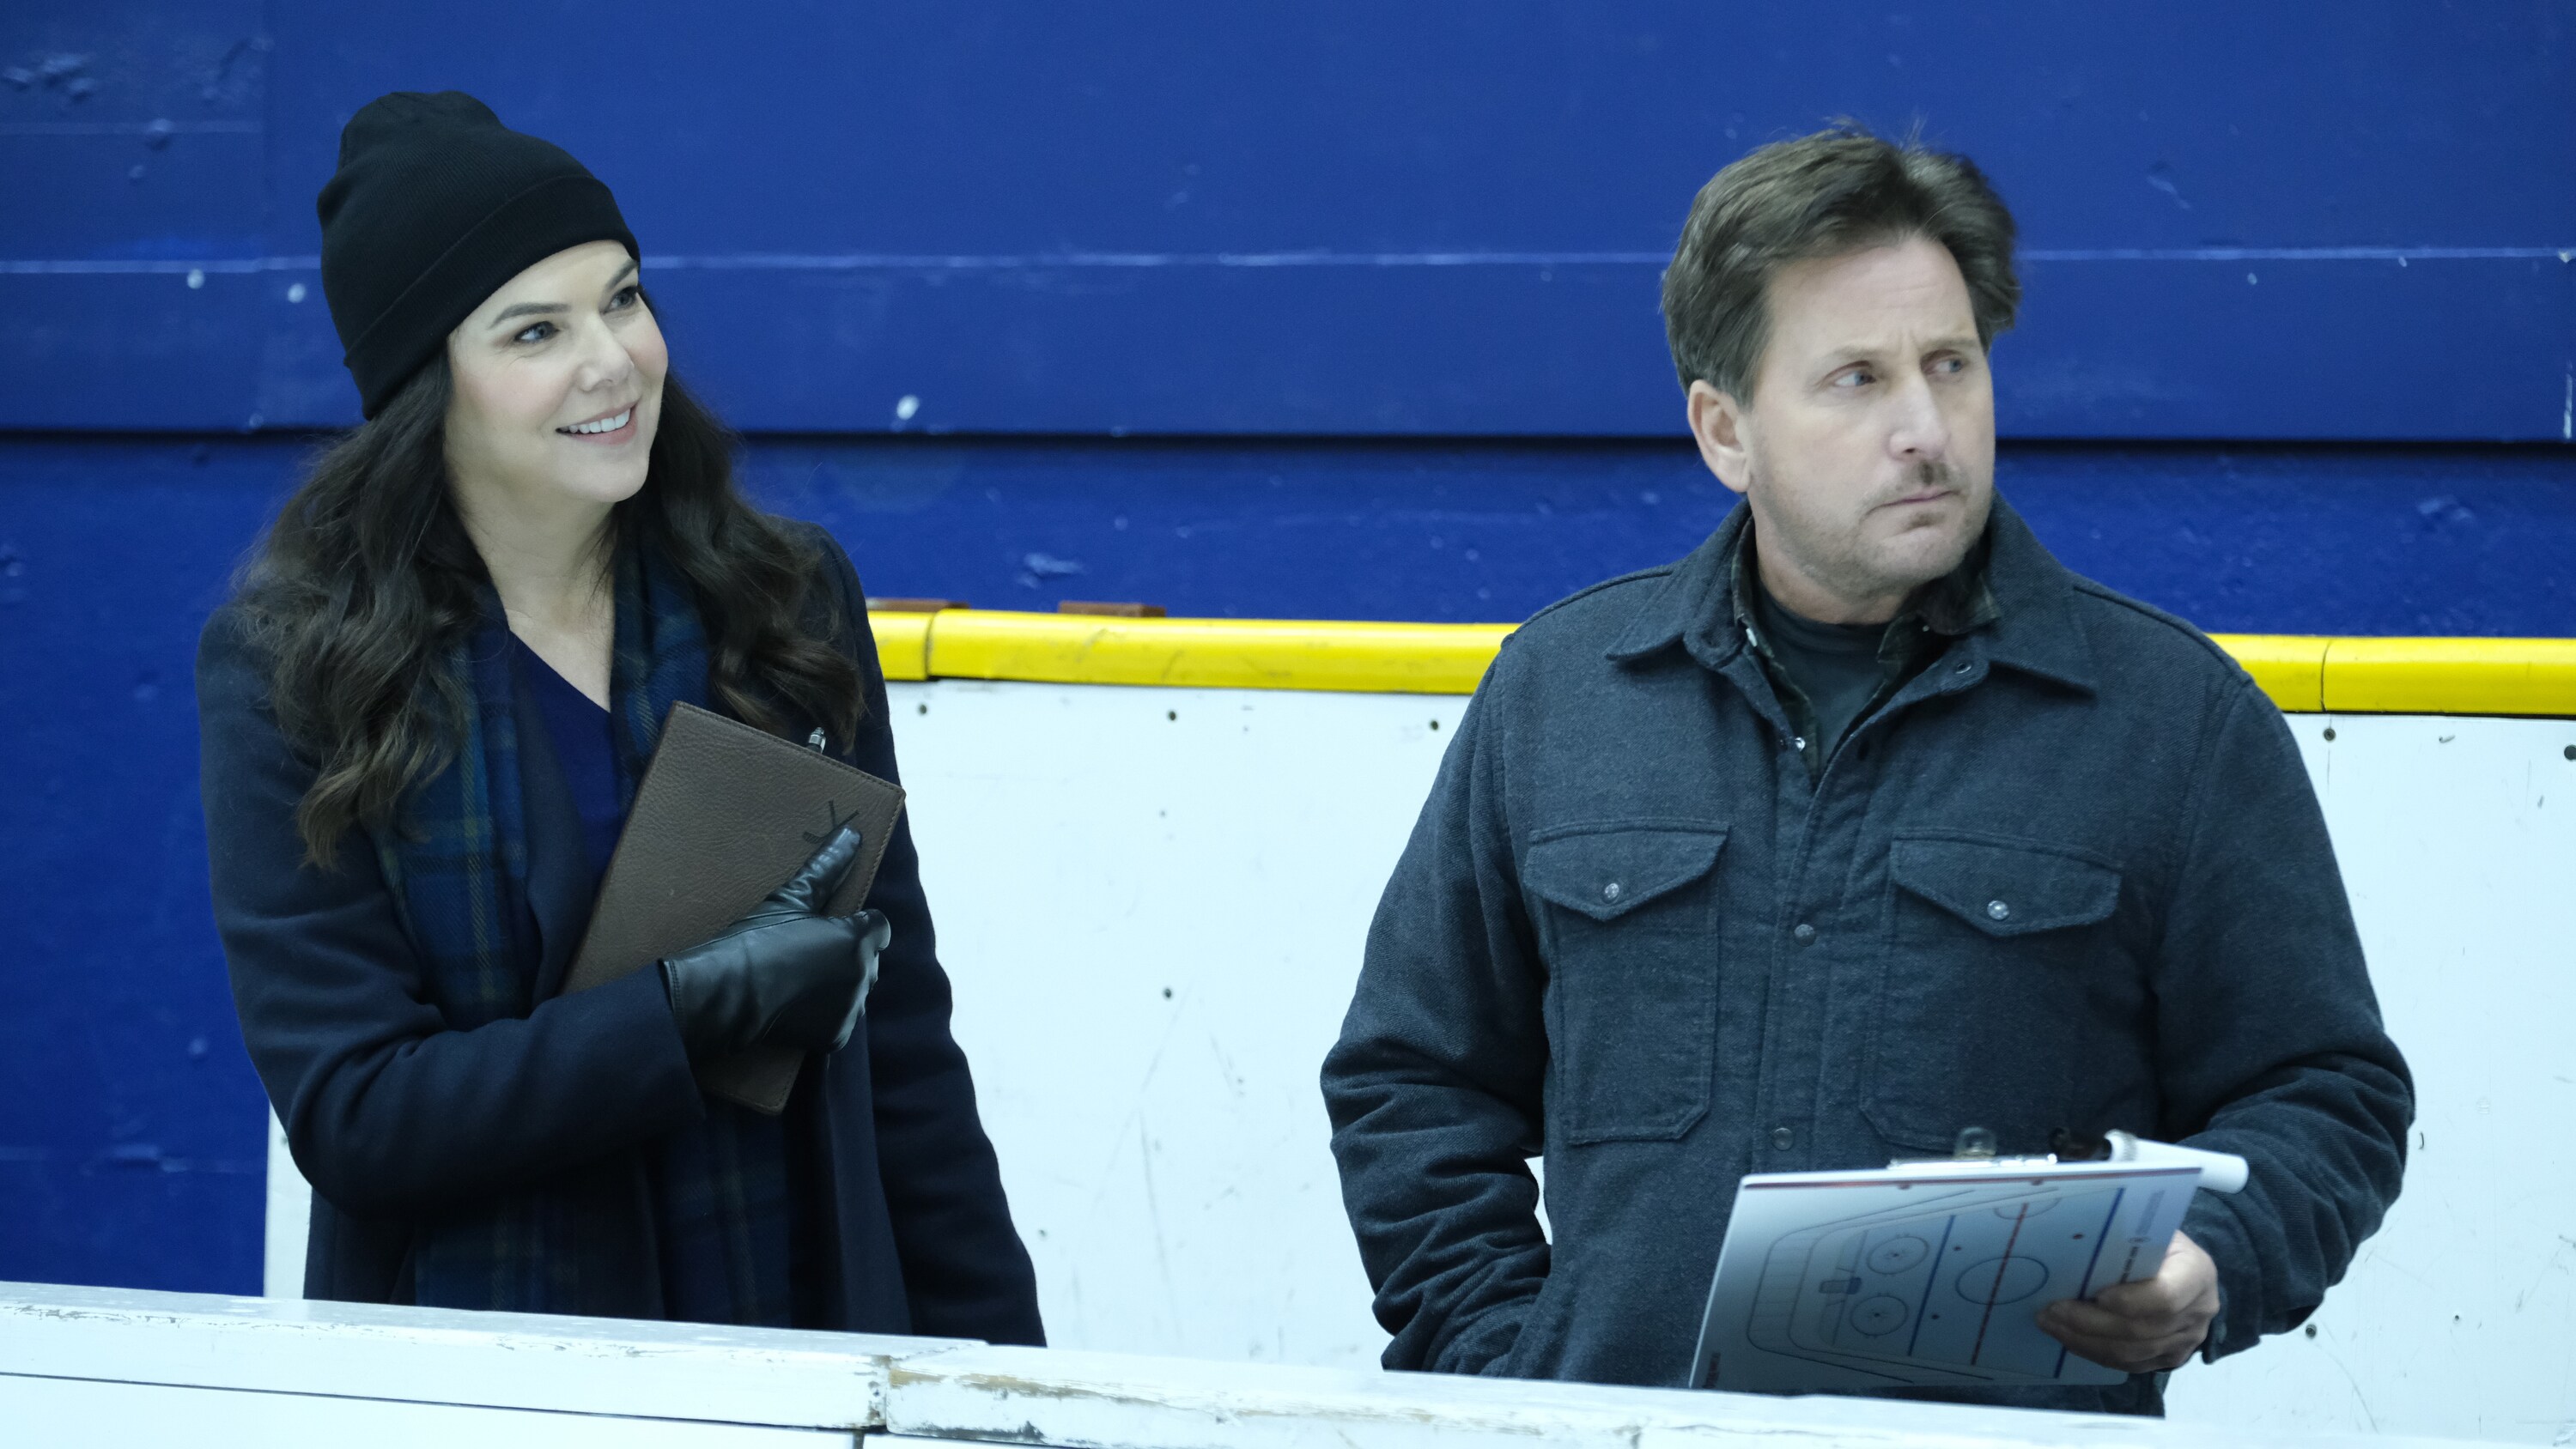 THE MIGHTY DUCKS: GAME CHANGERS - "State of Play" - The Don’t Bothers are forced to choose what’s really important, as they face the Ducks at States. (Disney/Liane Hentscher) LAUREN GRAHAM, EMILIO ESTEVEZ